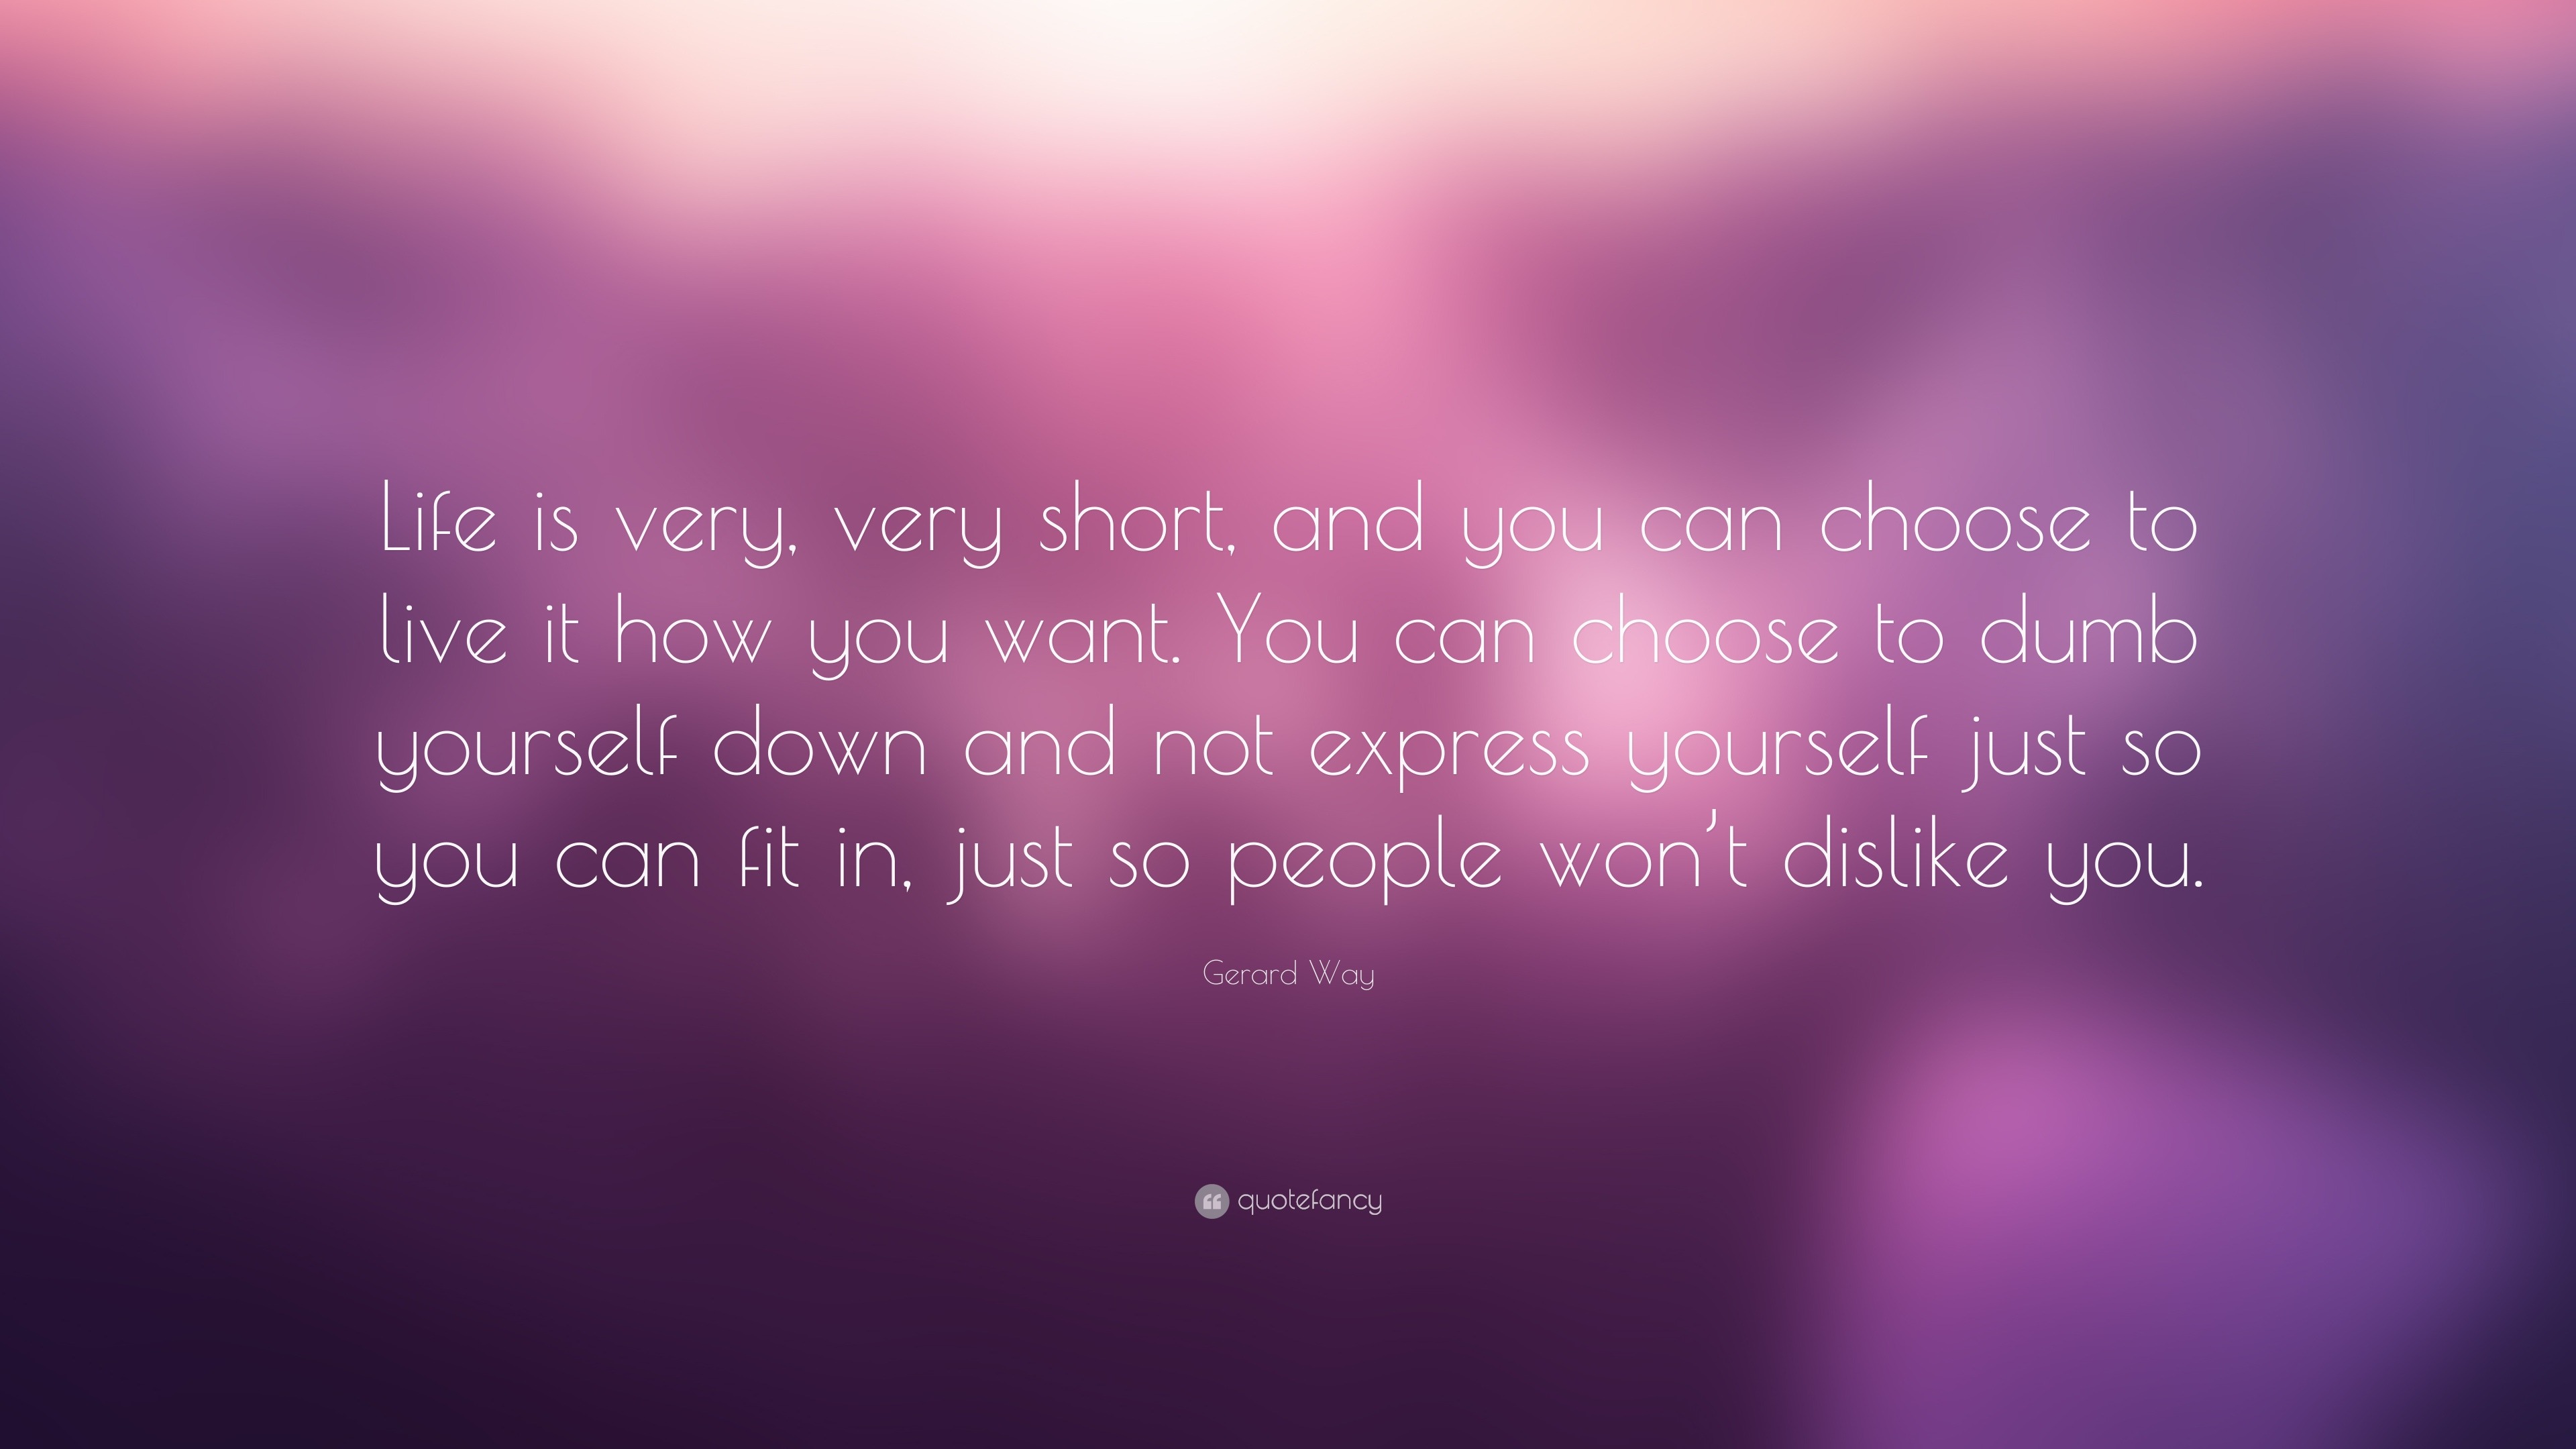 Gerard Way Quote: “Life is very, very short, and you can choose to live ...